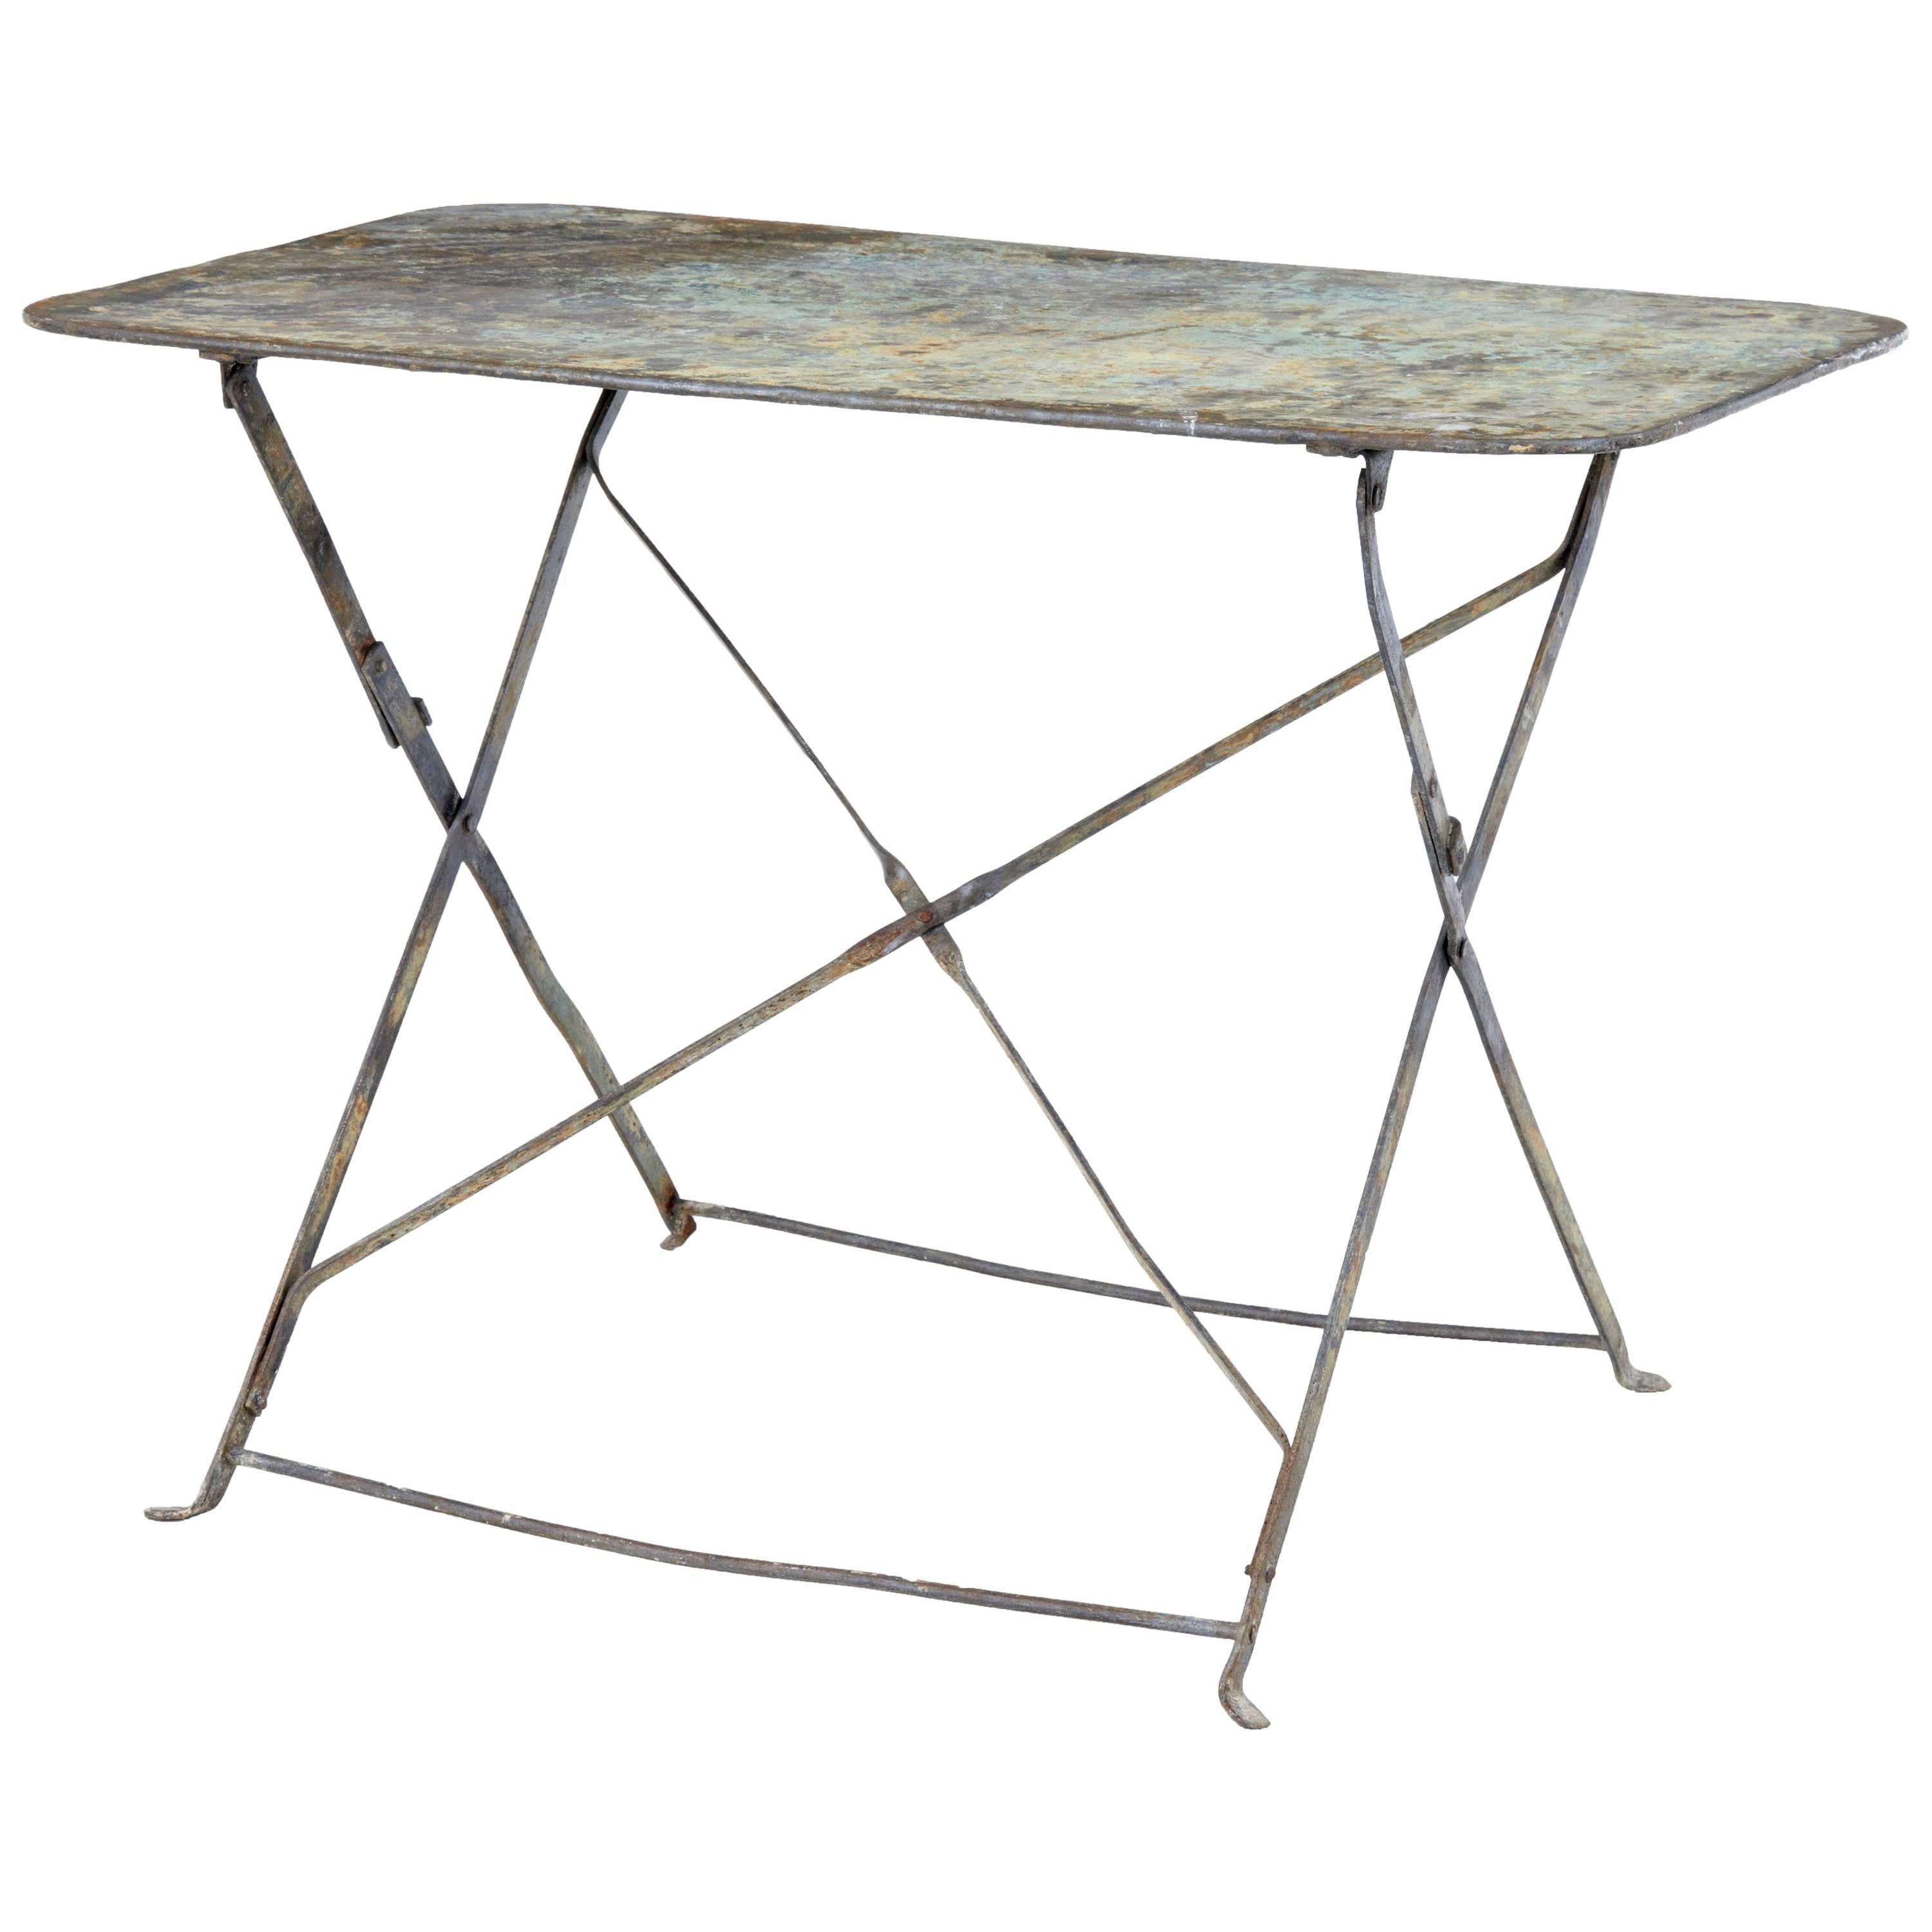 Early 20th Century French Painted Steel Garden Table